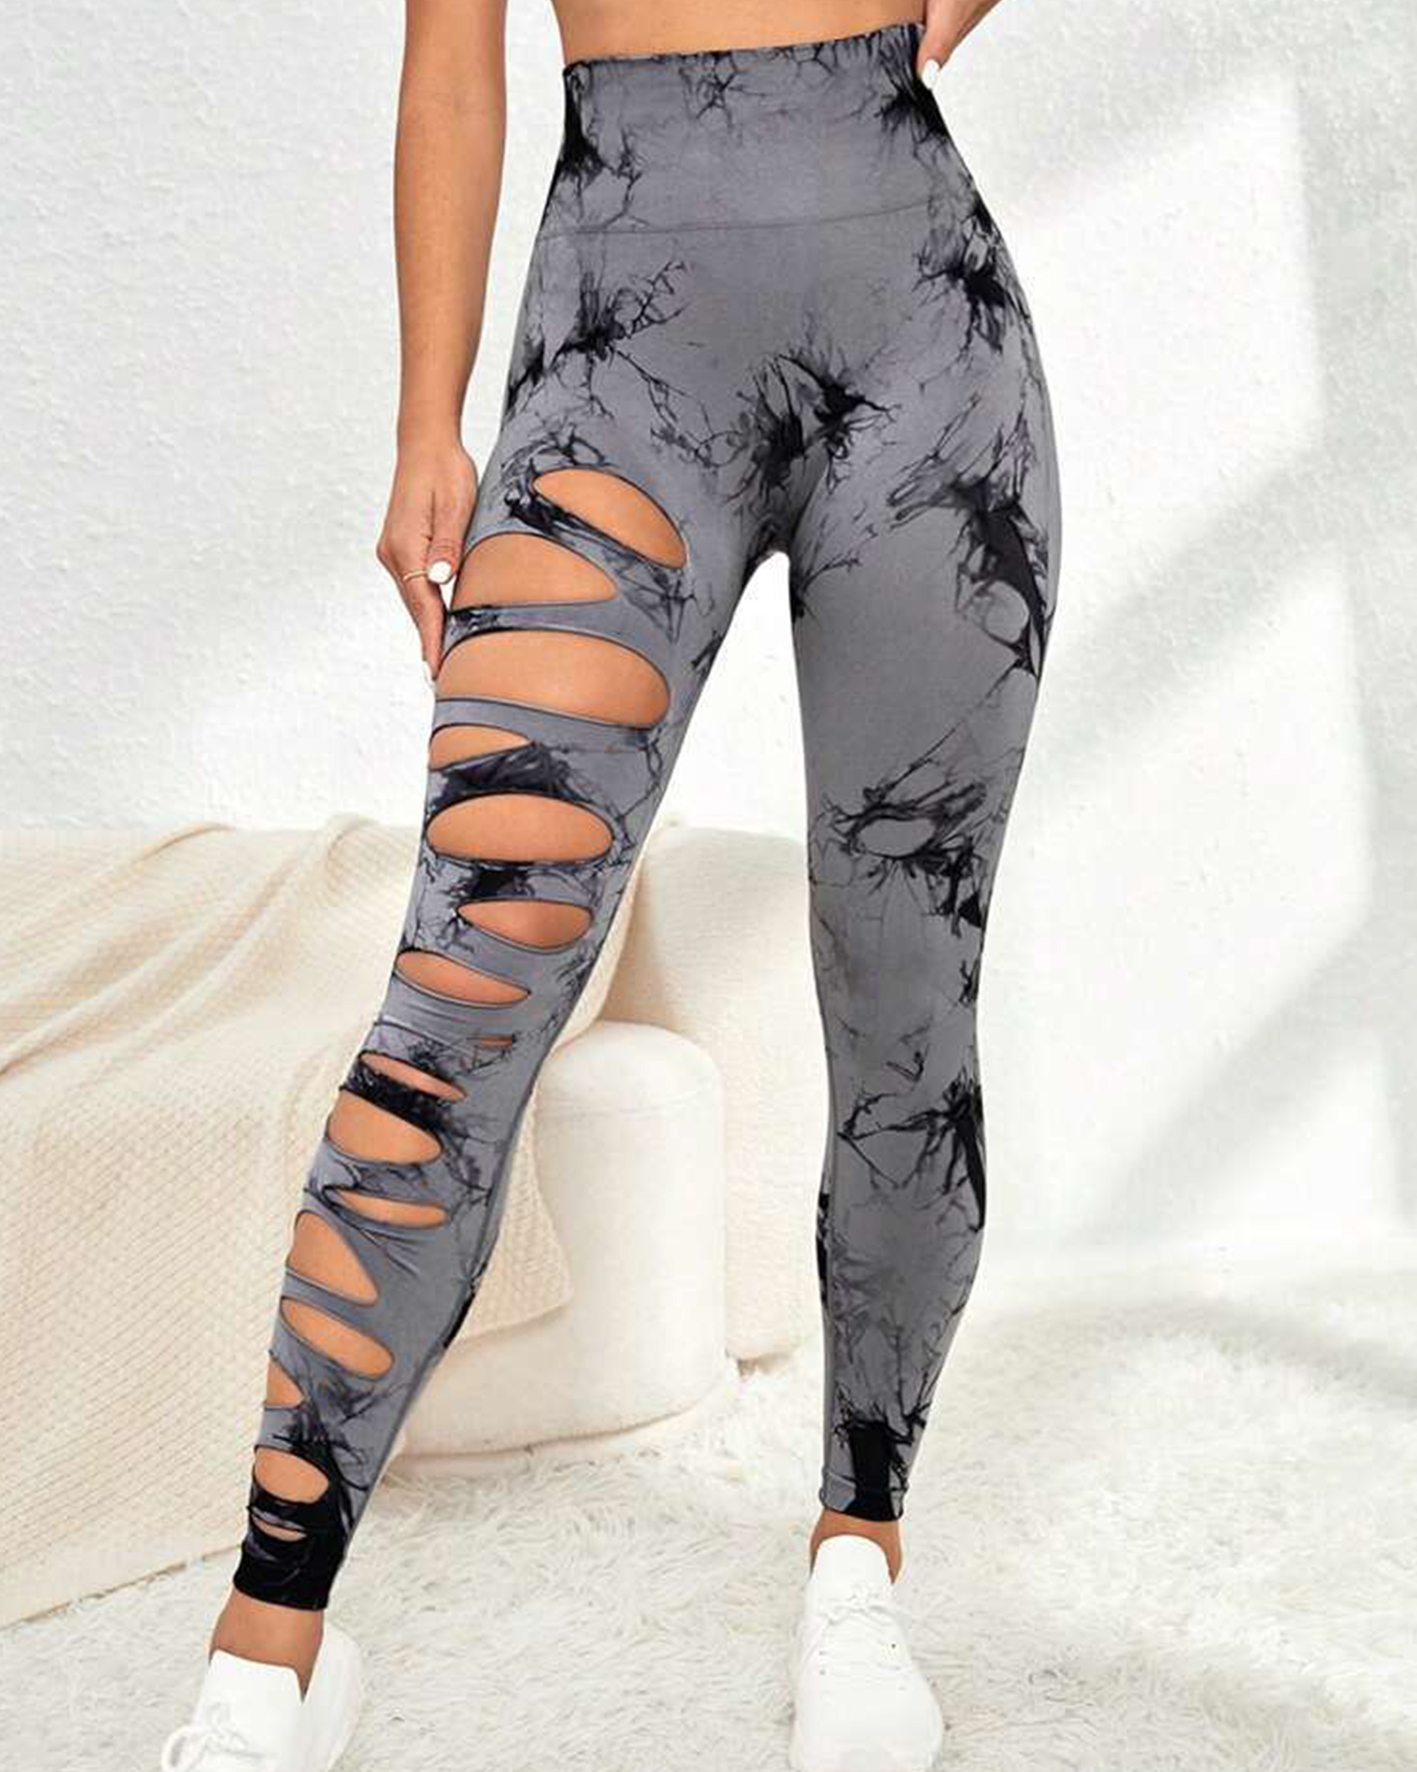 Cut-Out Tie-Dye High-Waisted Hip Lift Yoga Pants